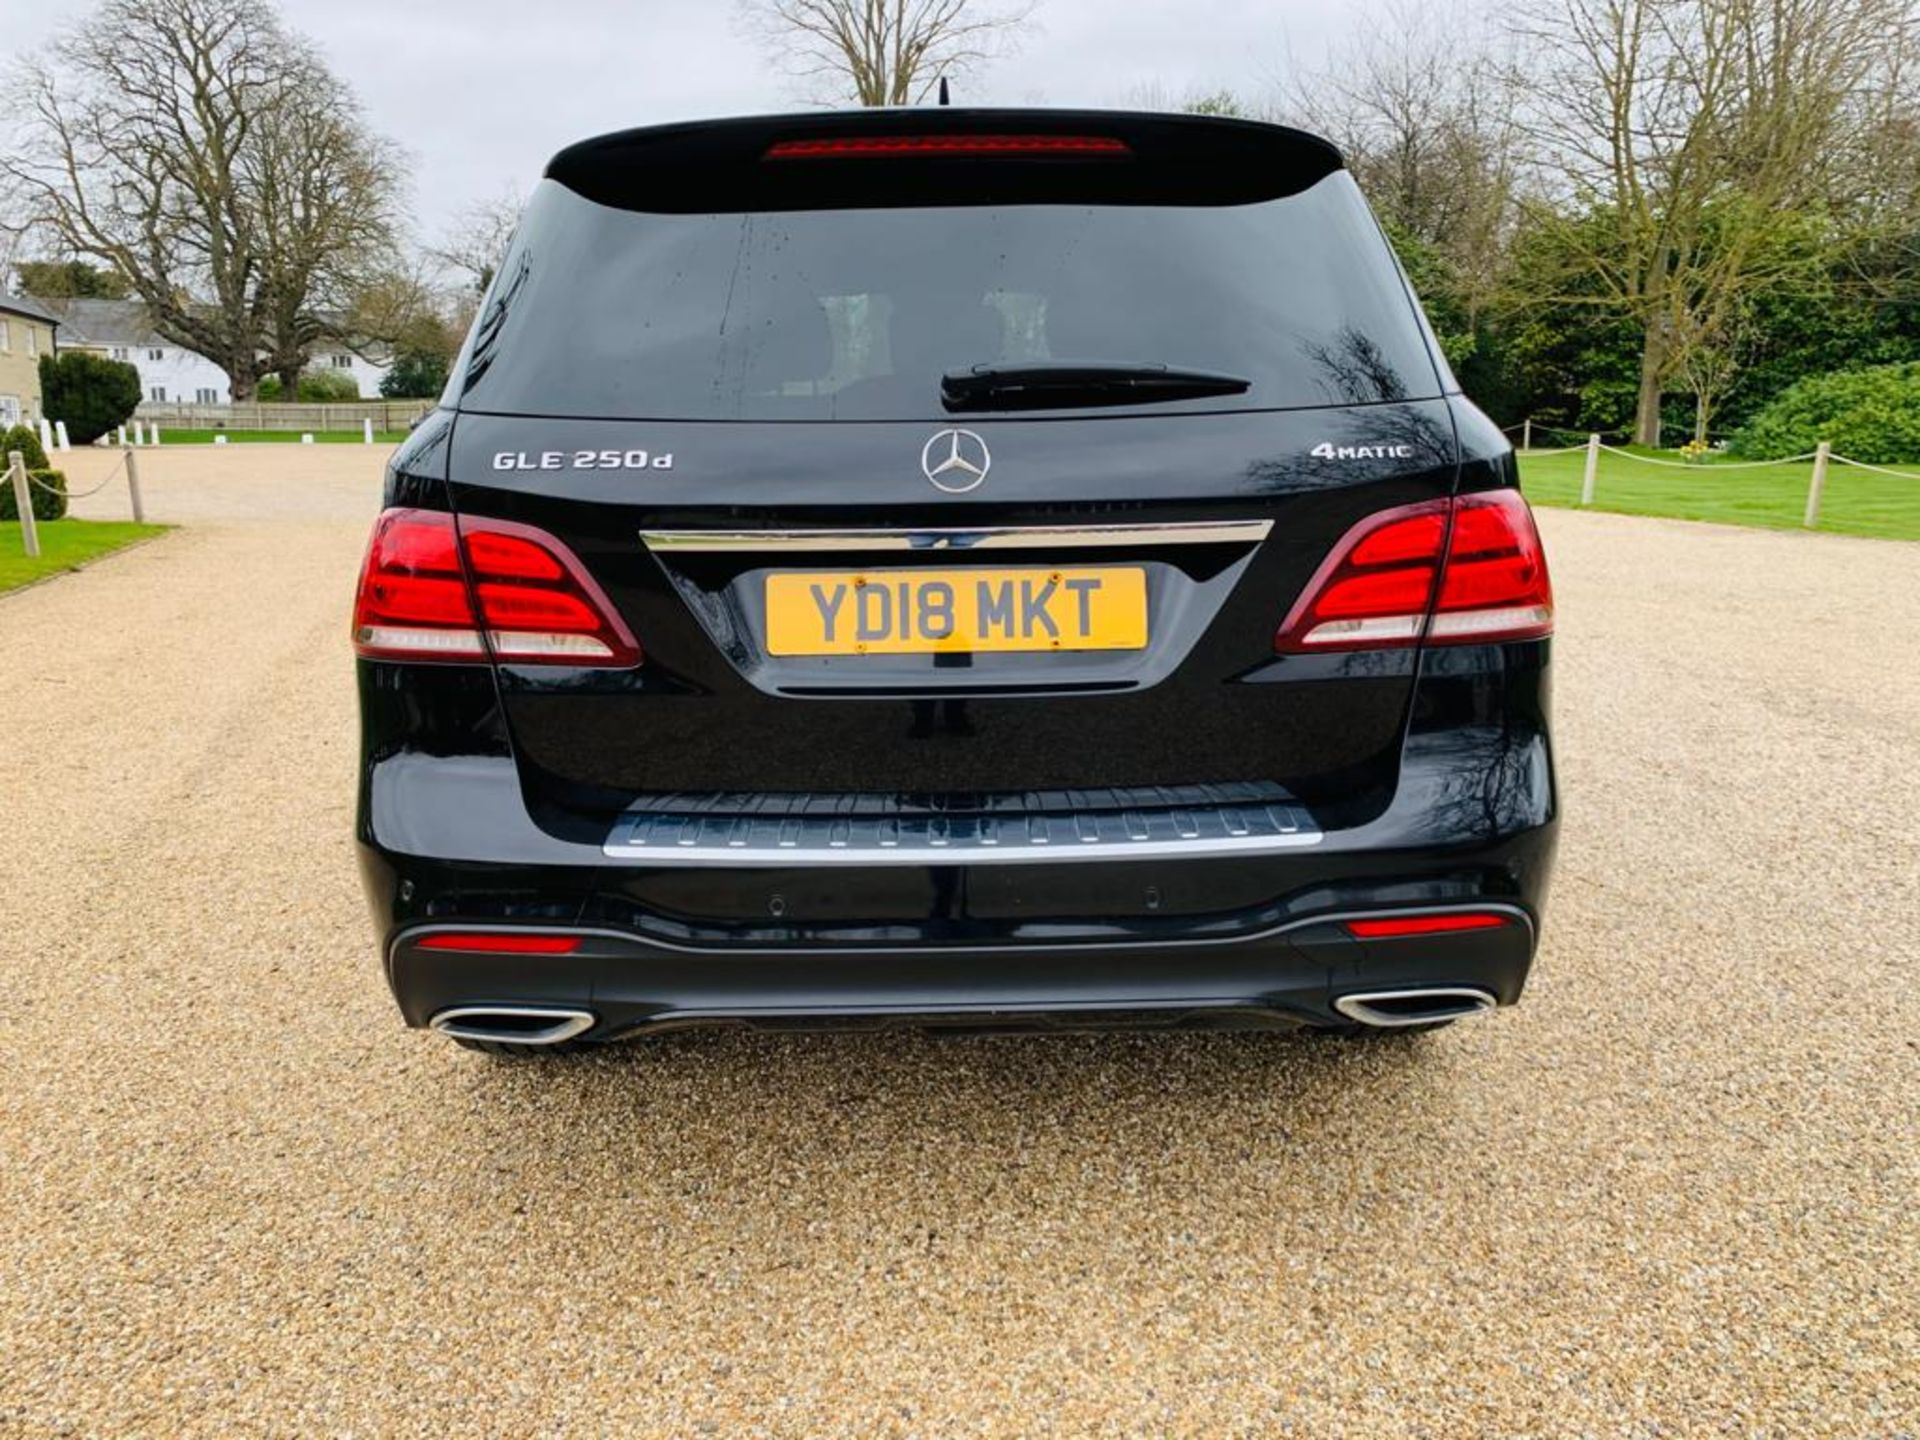 (RESERVE MET) Mercedes GLE 250d 4Matic AMG Night Edition 9G Tronic - 2018 18 Reg - Only 33K Miles - - Image 4 of 36